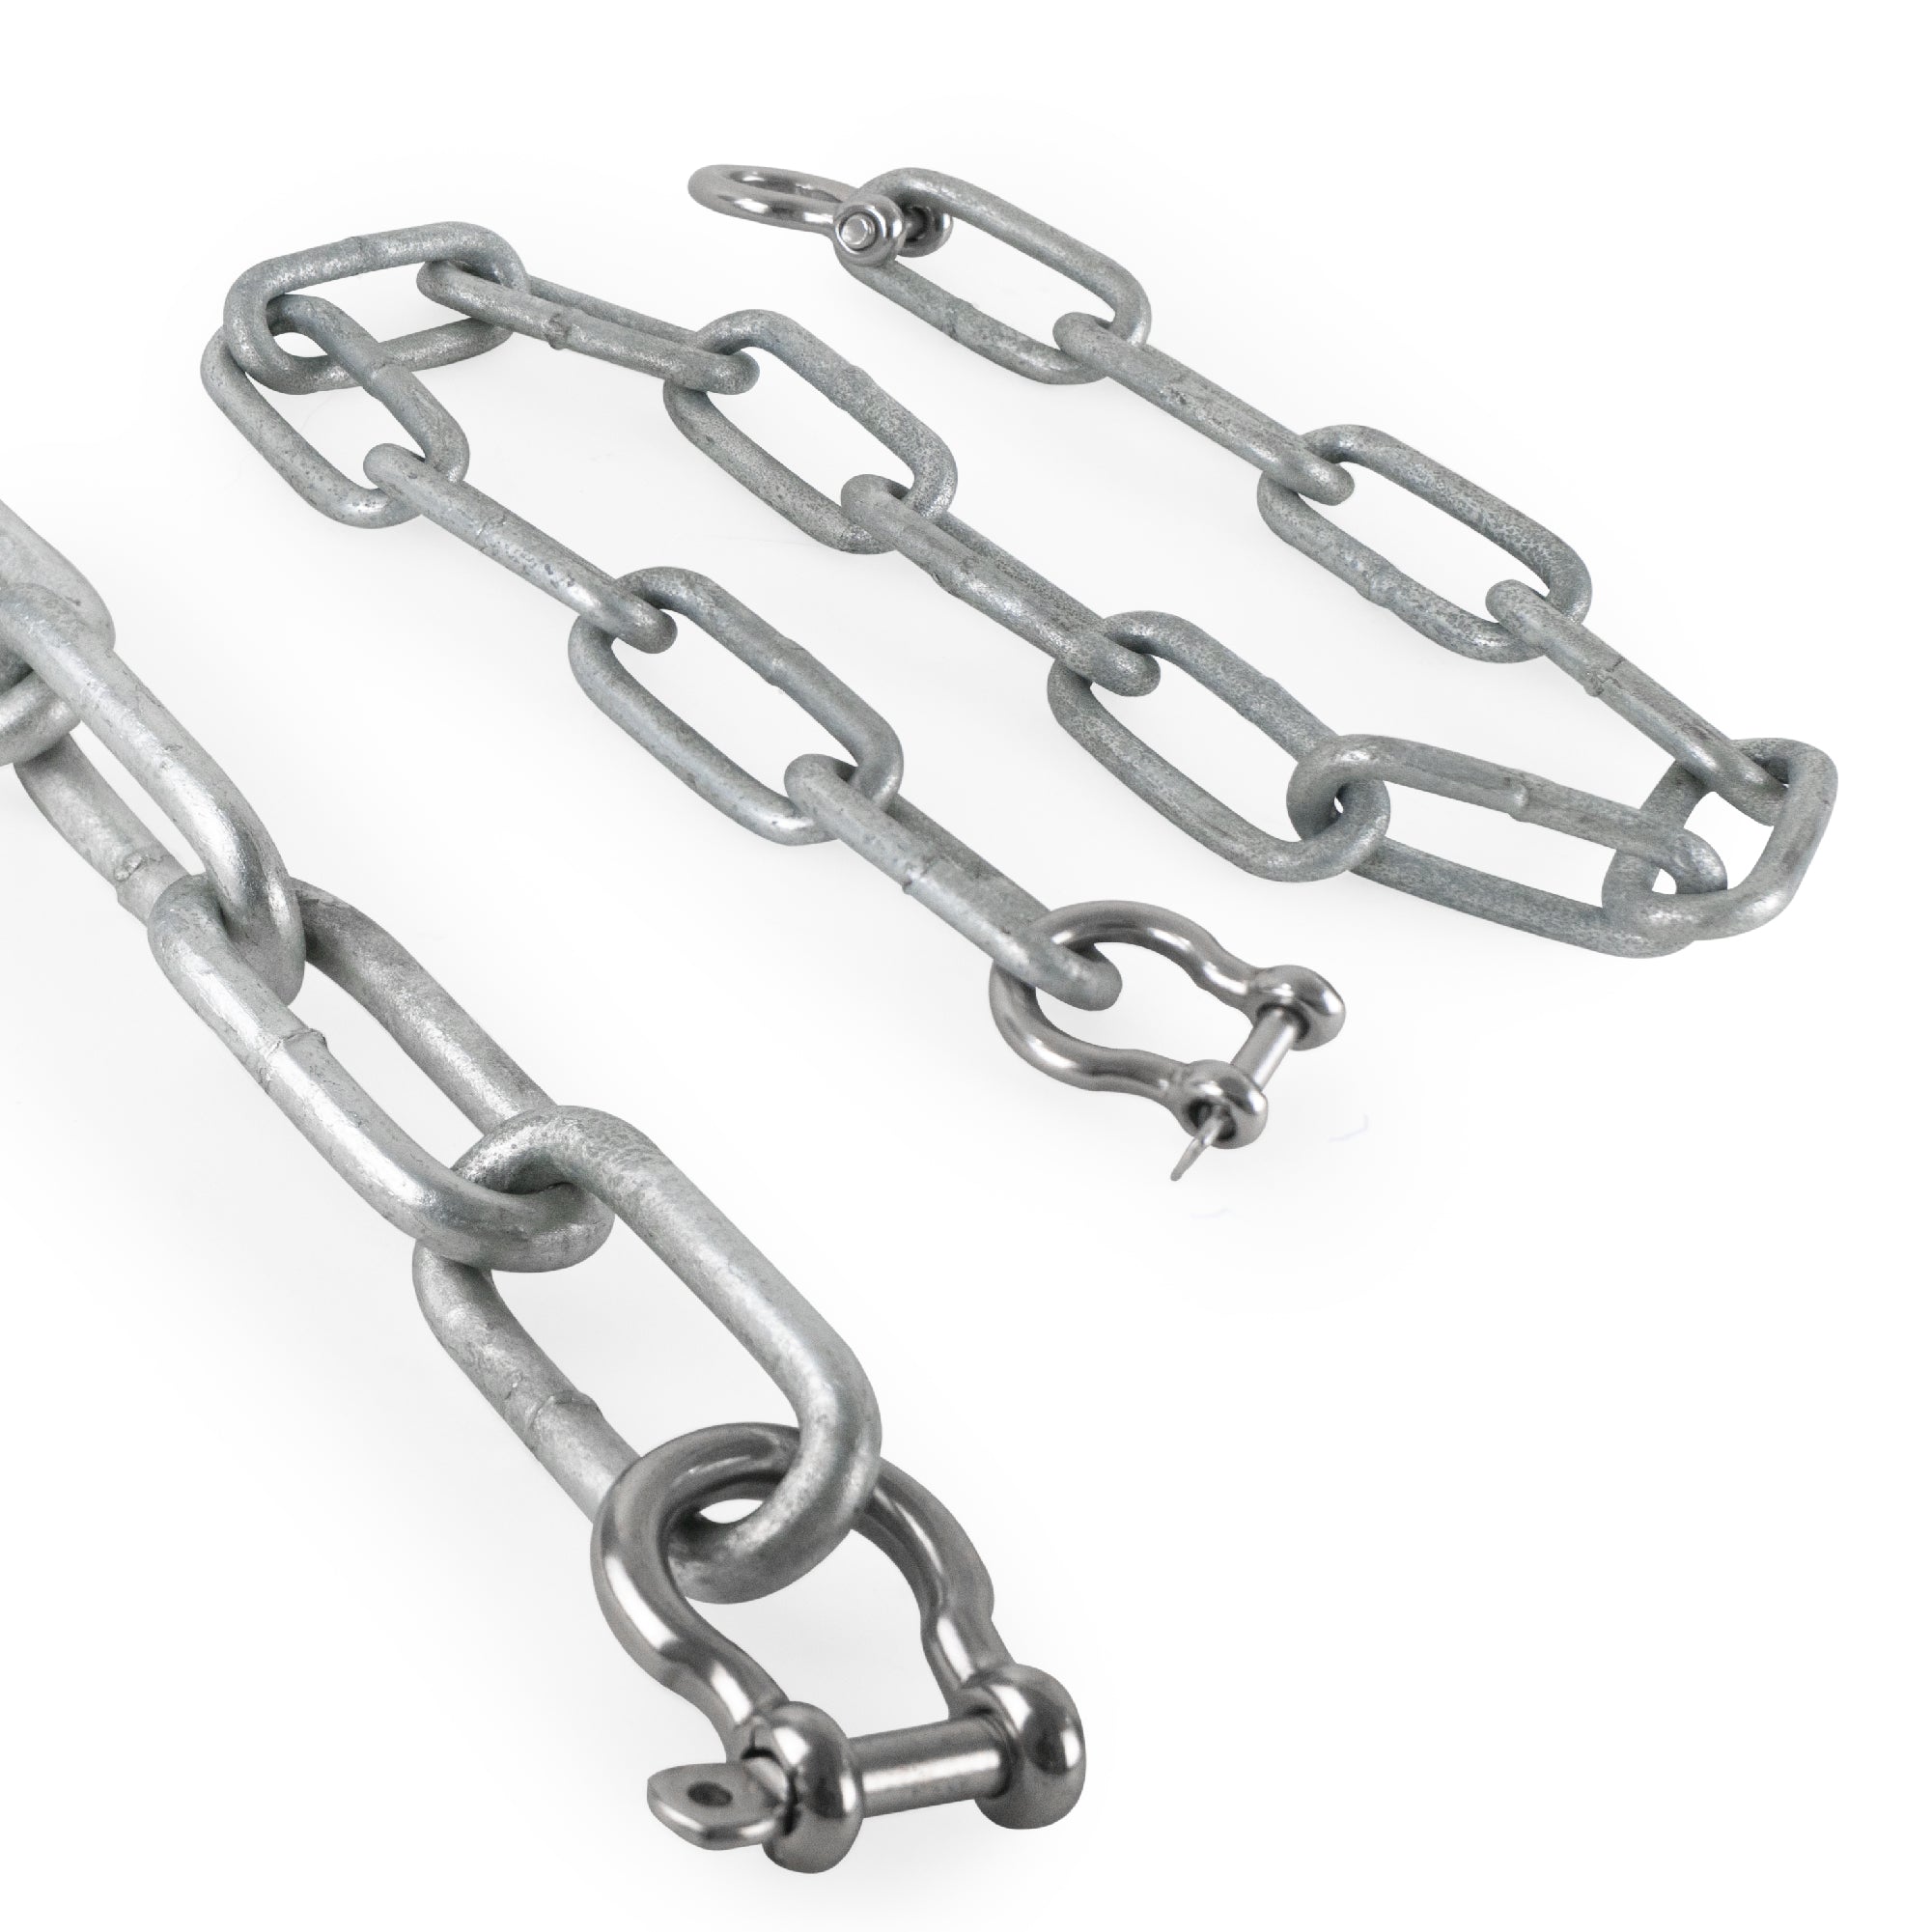 Boat Anchor Lead Chain with Shackles, 5/16 inches x 5 Feet Hot-Dipped Galvanized Steel with 2 AISI316 Stainless Steel 5/16 inches Bow Shackles FO4569-GN5